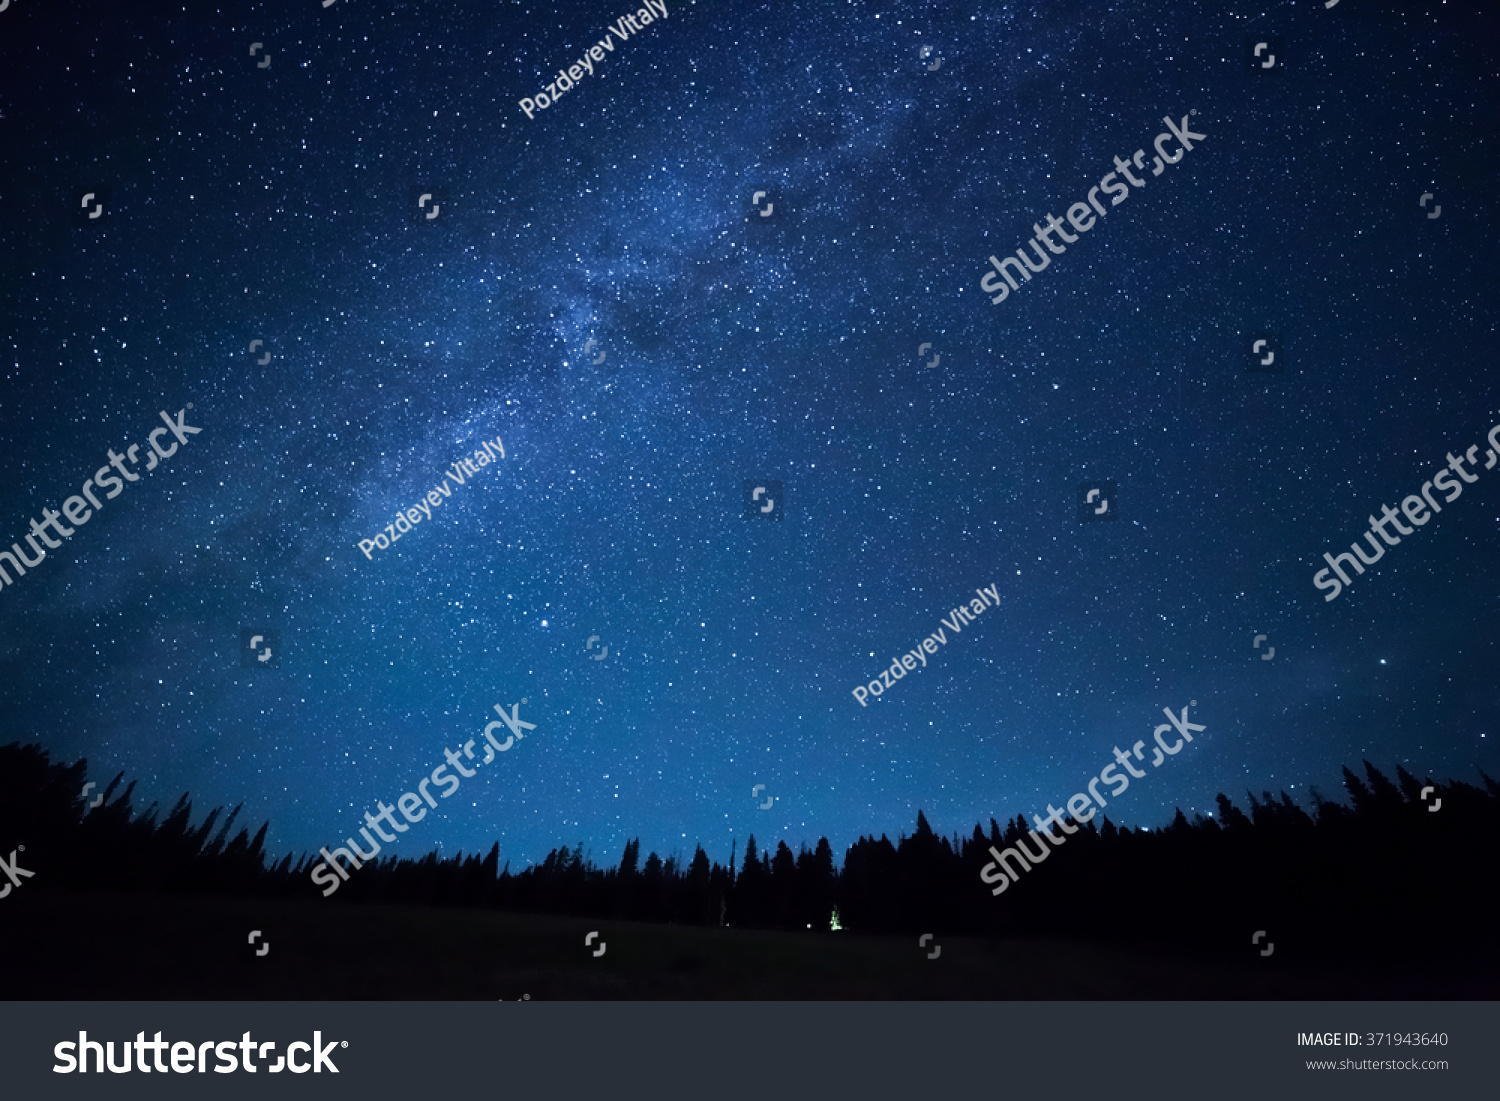 Blue dark night sky with many stars above field of trees. Yellowstone park. Milkyway cosmos background #371943640